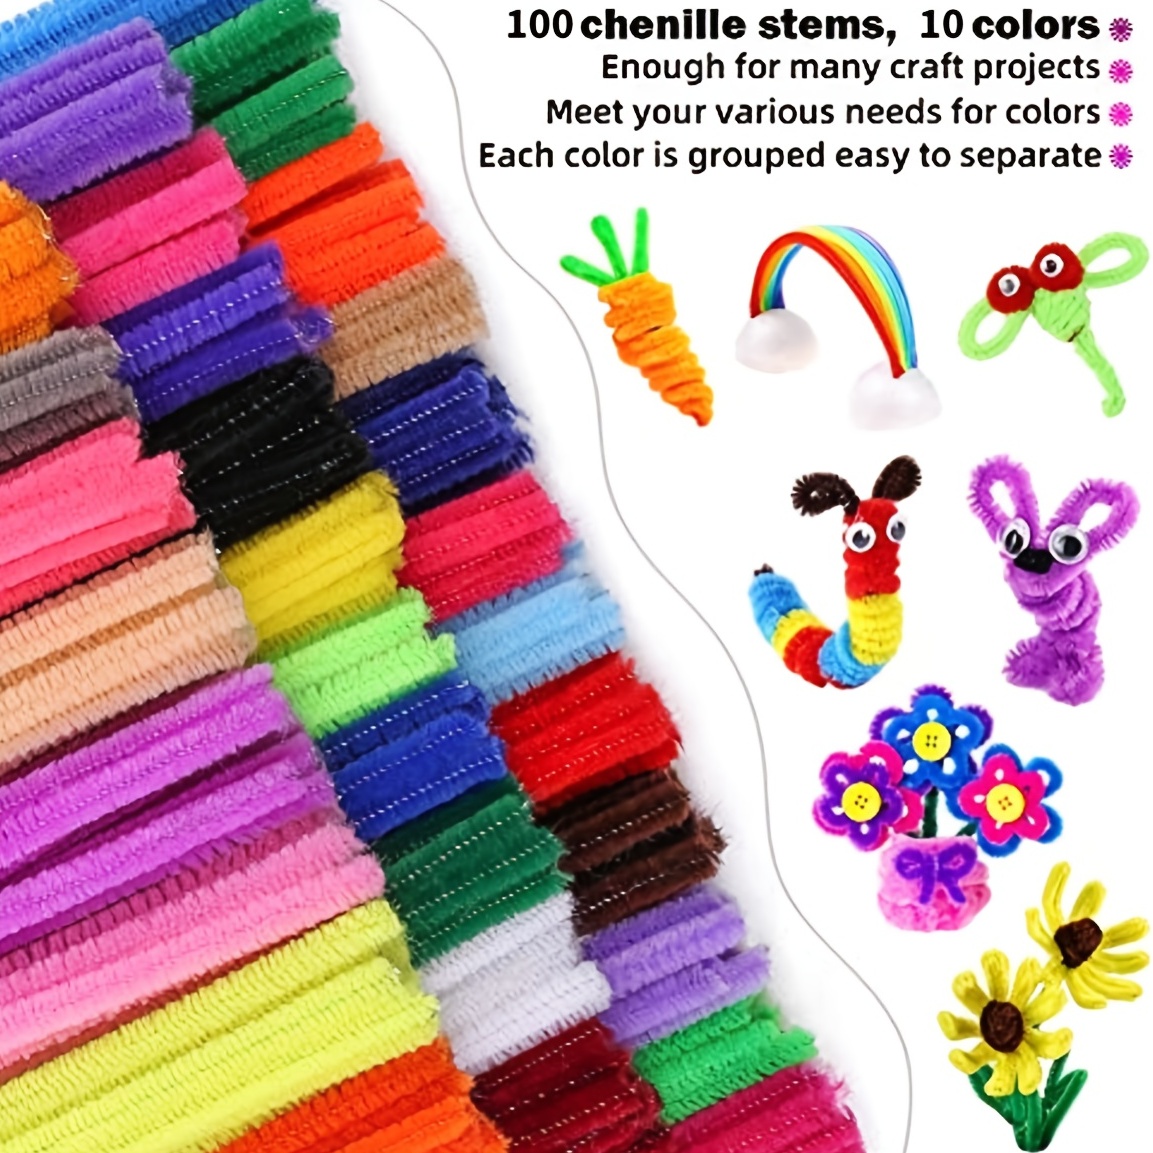 100pcs/Bag 30cm Chenille Stems Pipe Cleaners Kids Plush Educational Toy  Colorful Pipe Cleaner Toys Handmade DIY Craft Supplies